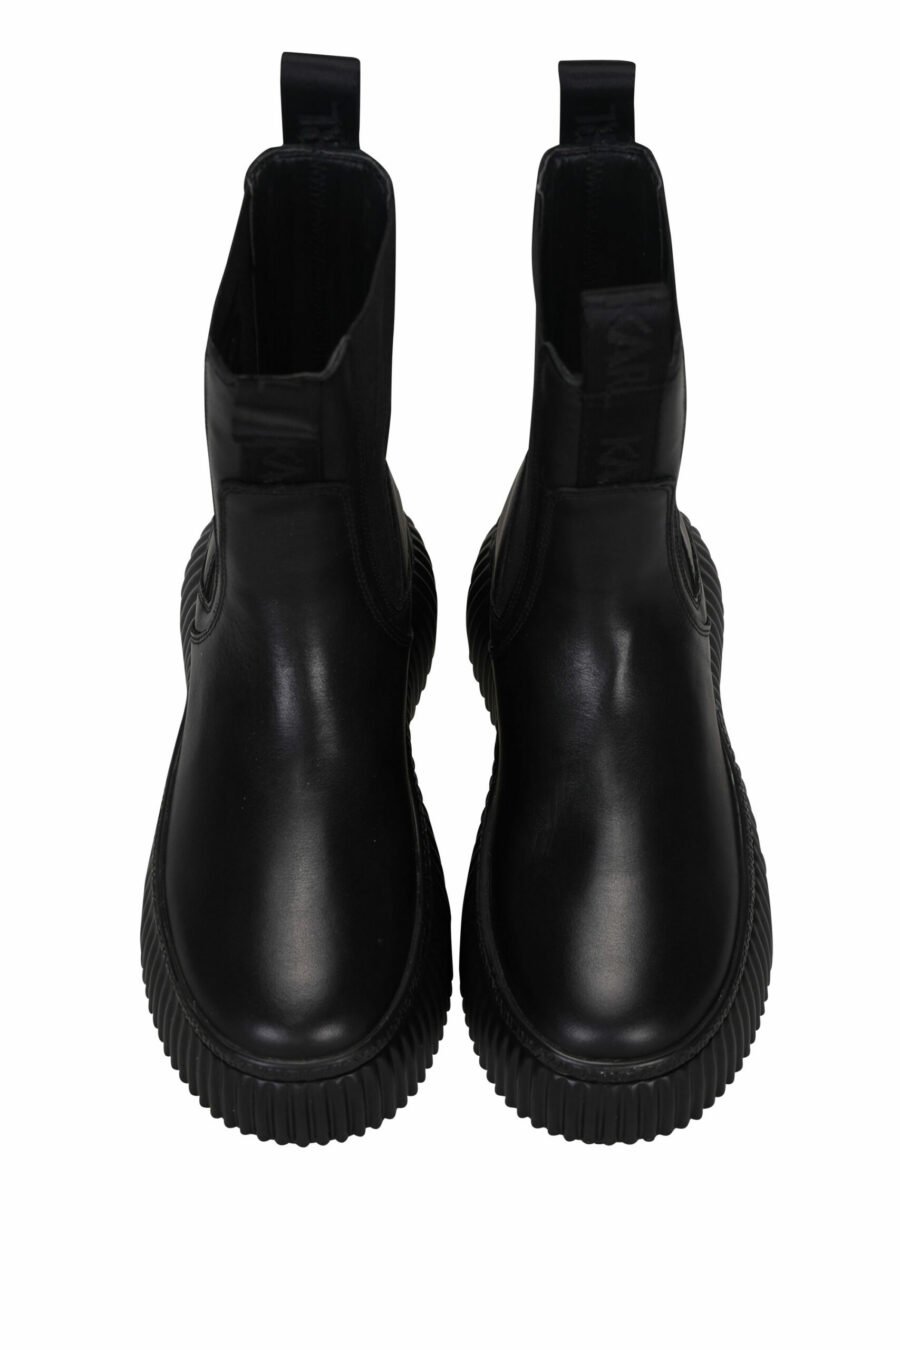 Black ankle boots with vertical logo and platform - 5059529315176 4 scaled